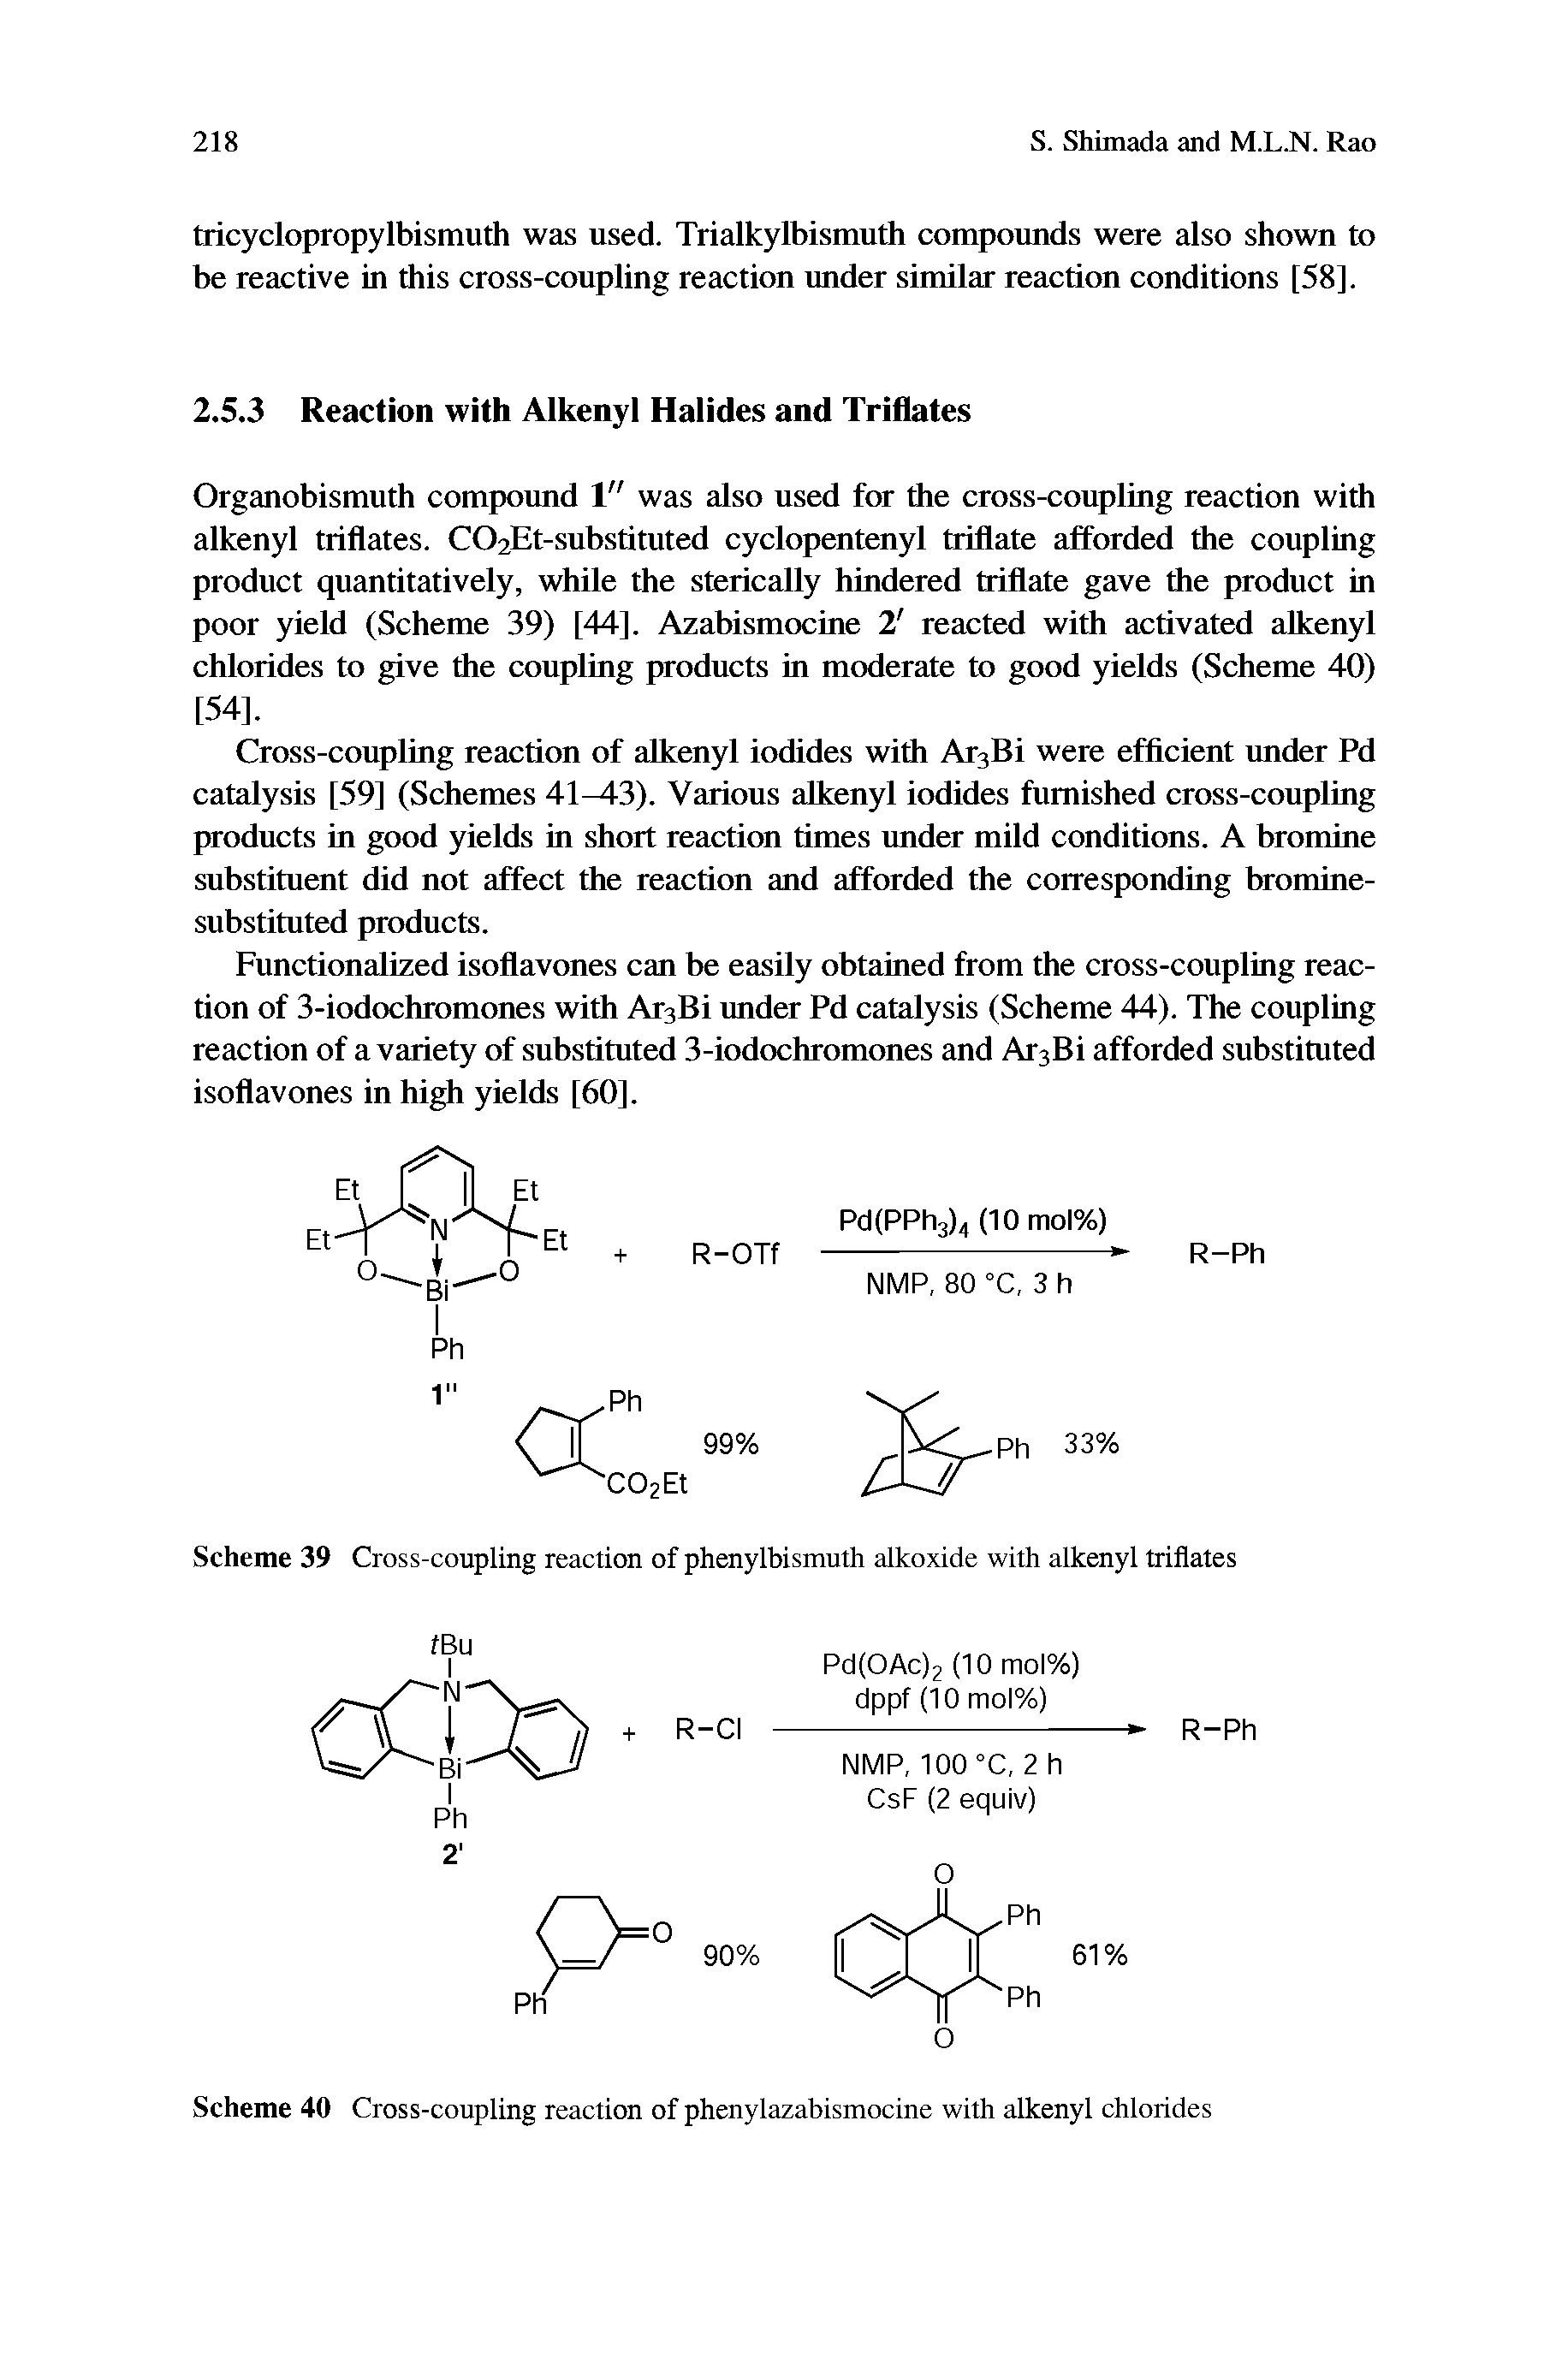 Scheme 39 Cross-coupling reaction of phenylbismuth alkoxide with alkenyl triflates...